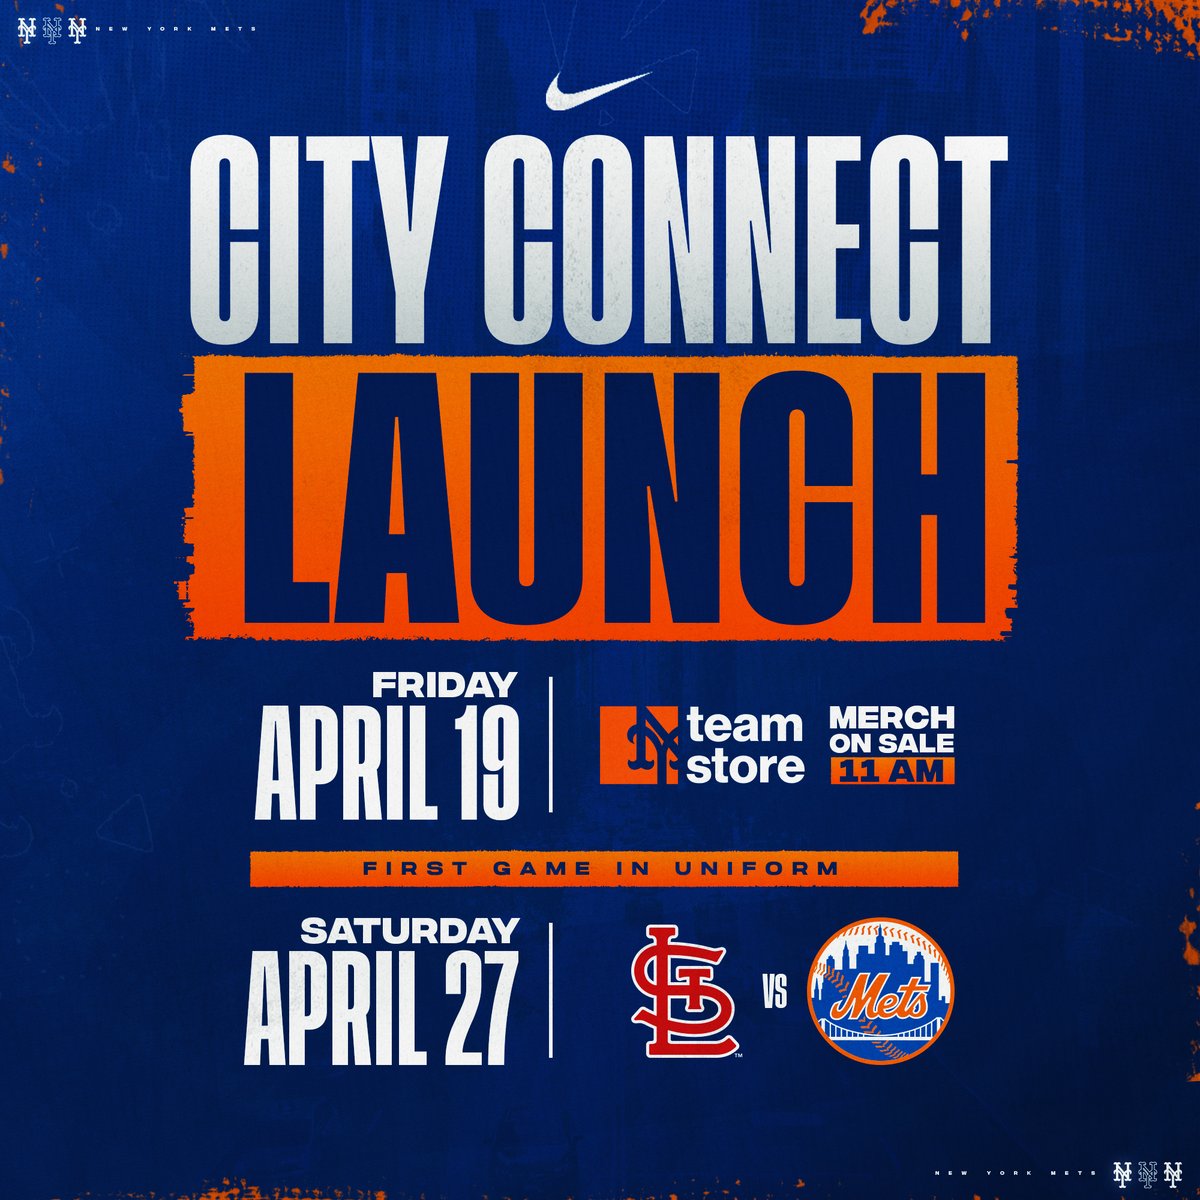 Our City Connect launch drops at the @CitiField Team Store this Friday, April 19 at 11 a.m. Come shop the new gear! See the jerseys on field for the first time Saturday, April 27 👉 bit.ly/3JidPWv